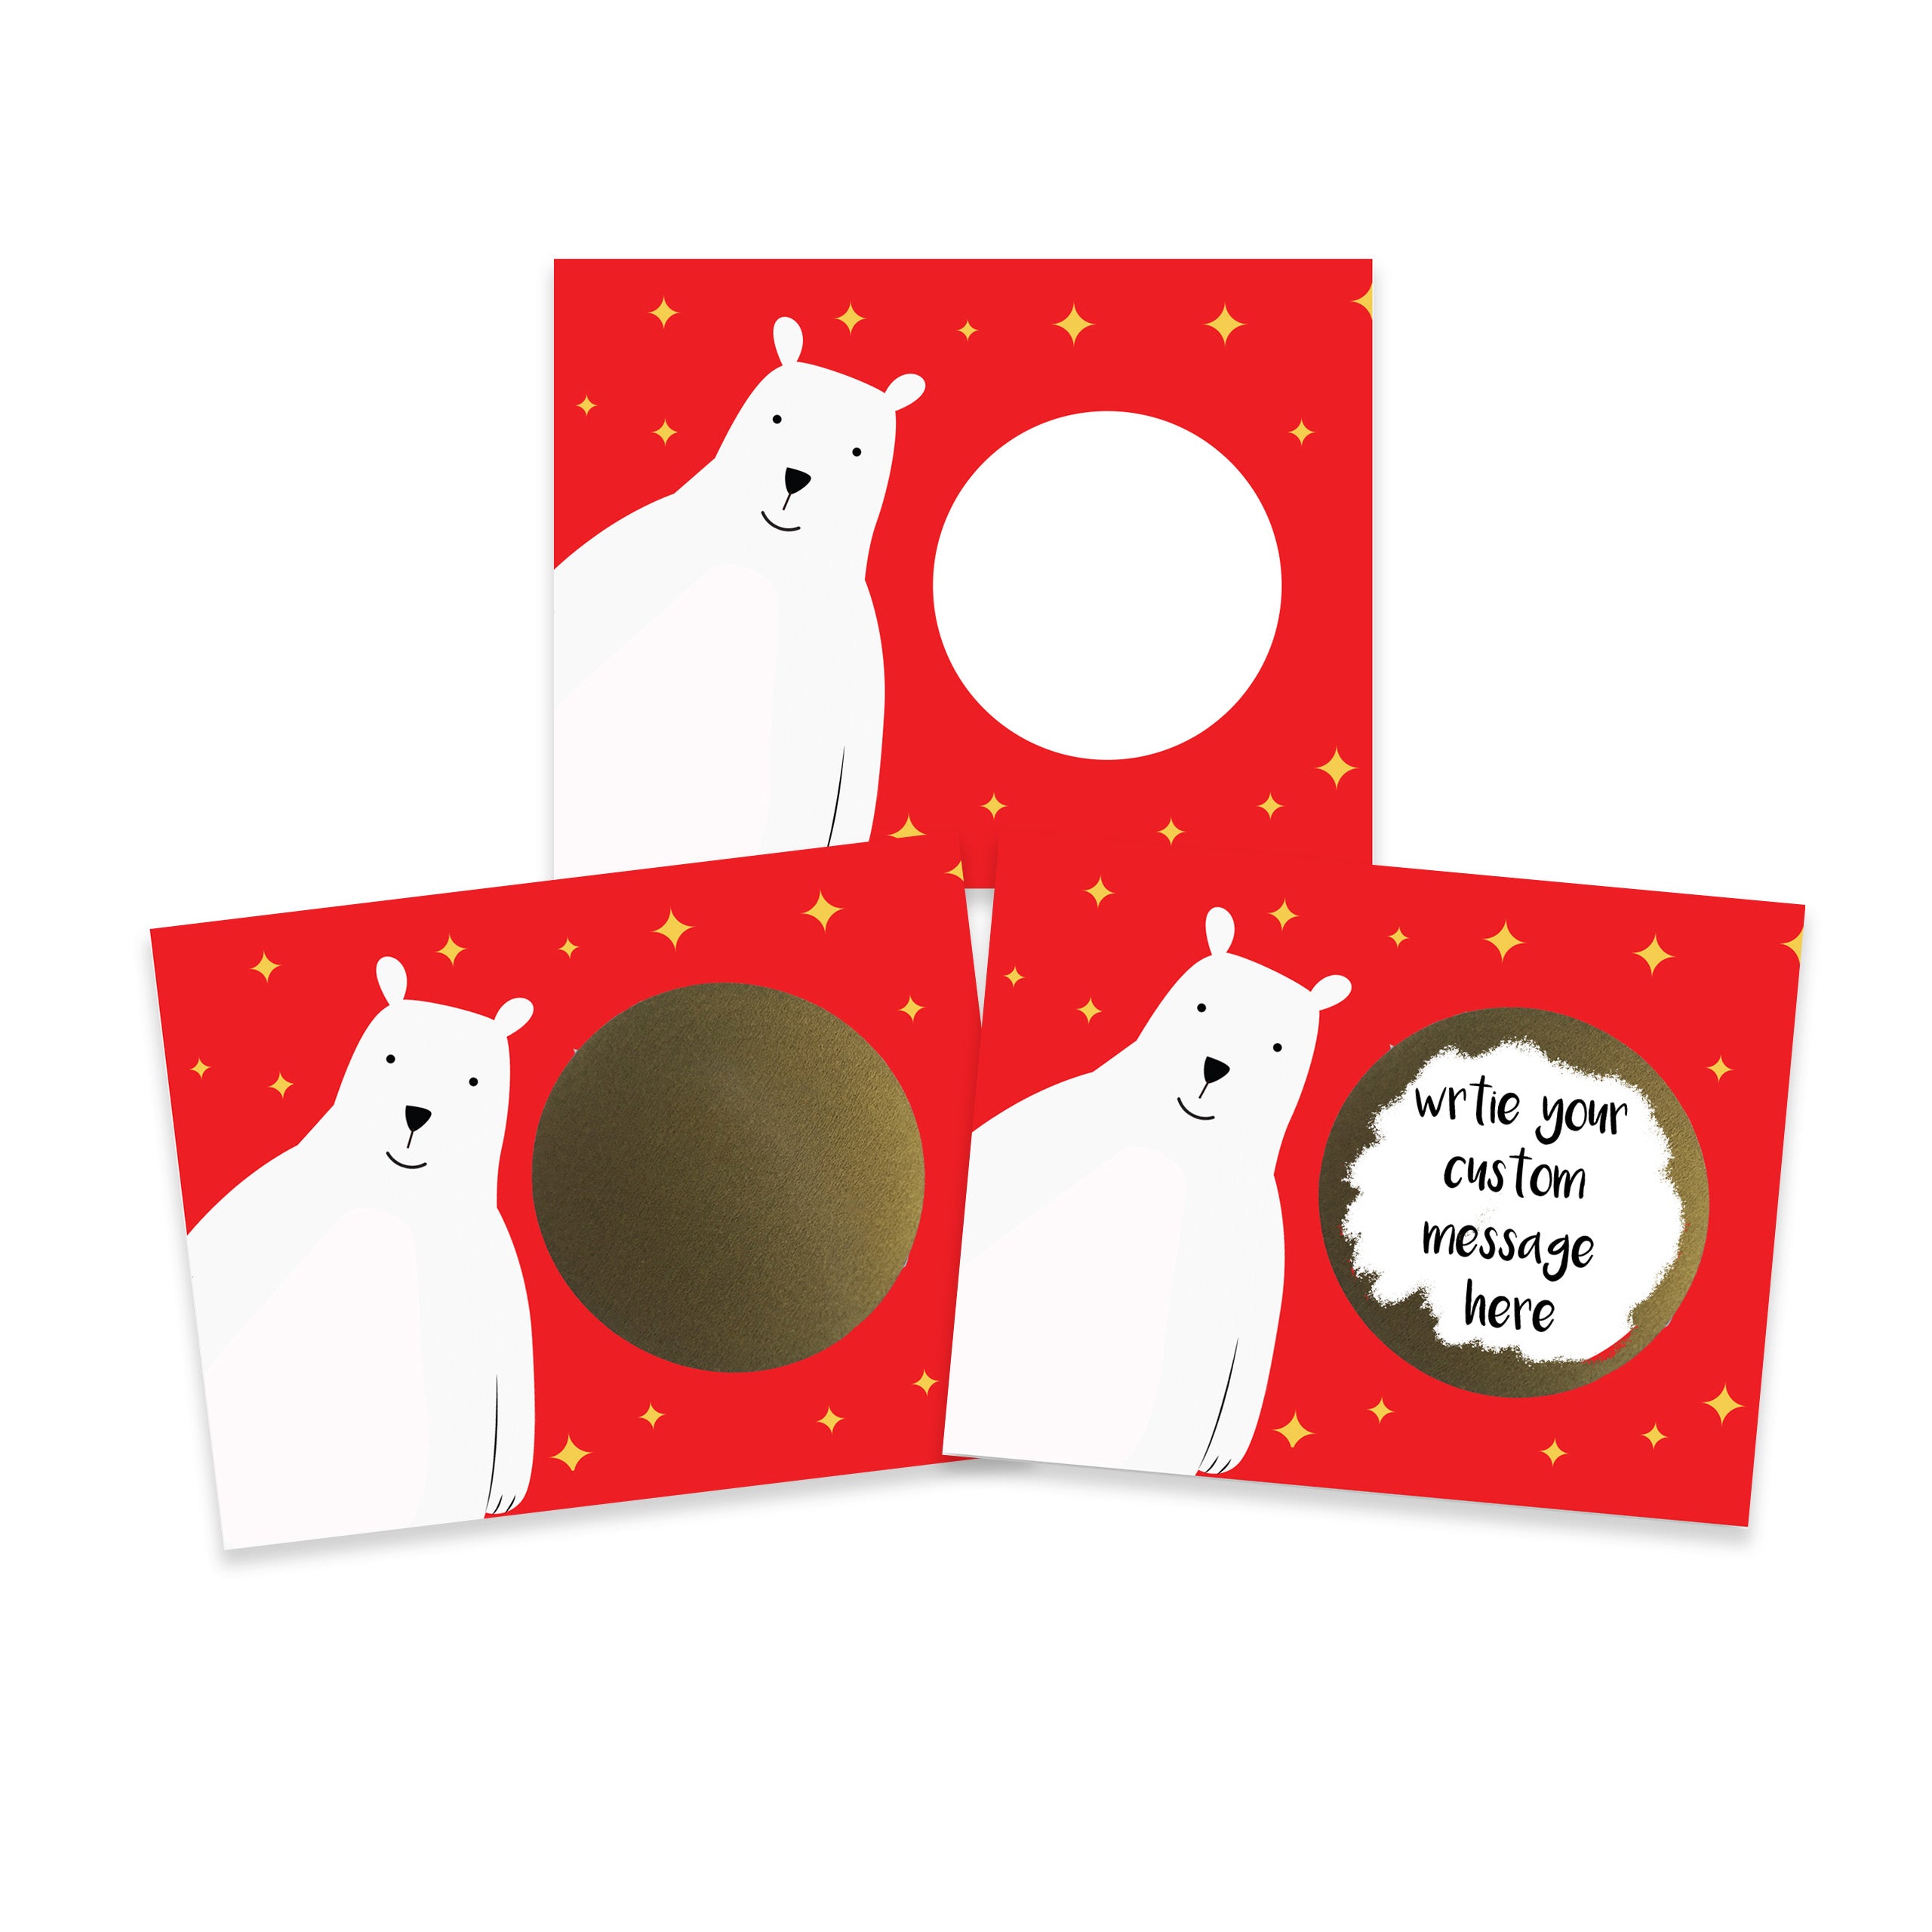 DIY Christmas Polar Bear Make Your Own Scratch Off Cards - 20 Cards and 20 Scratch Off Stickers